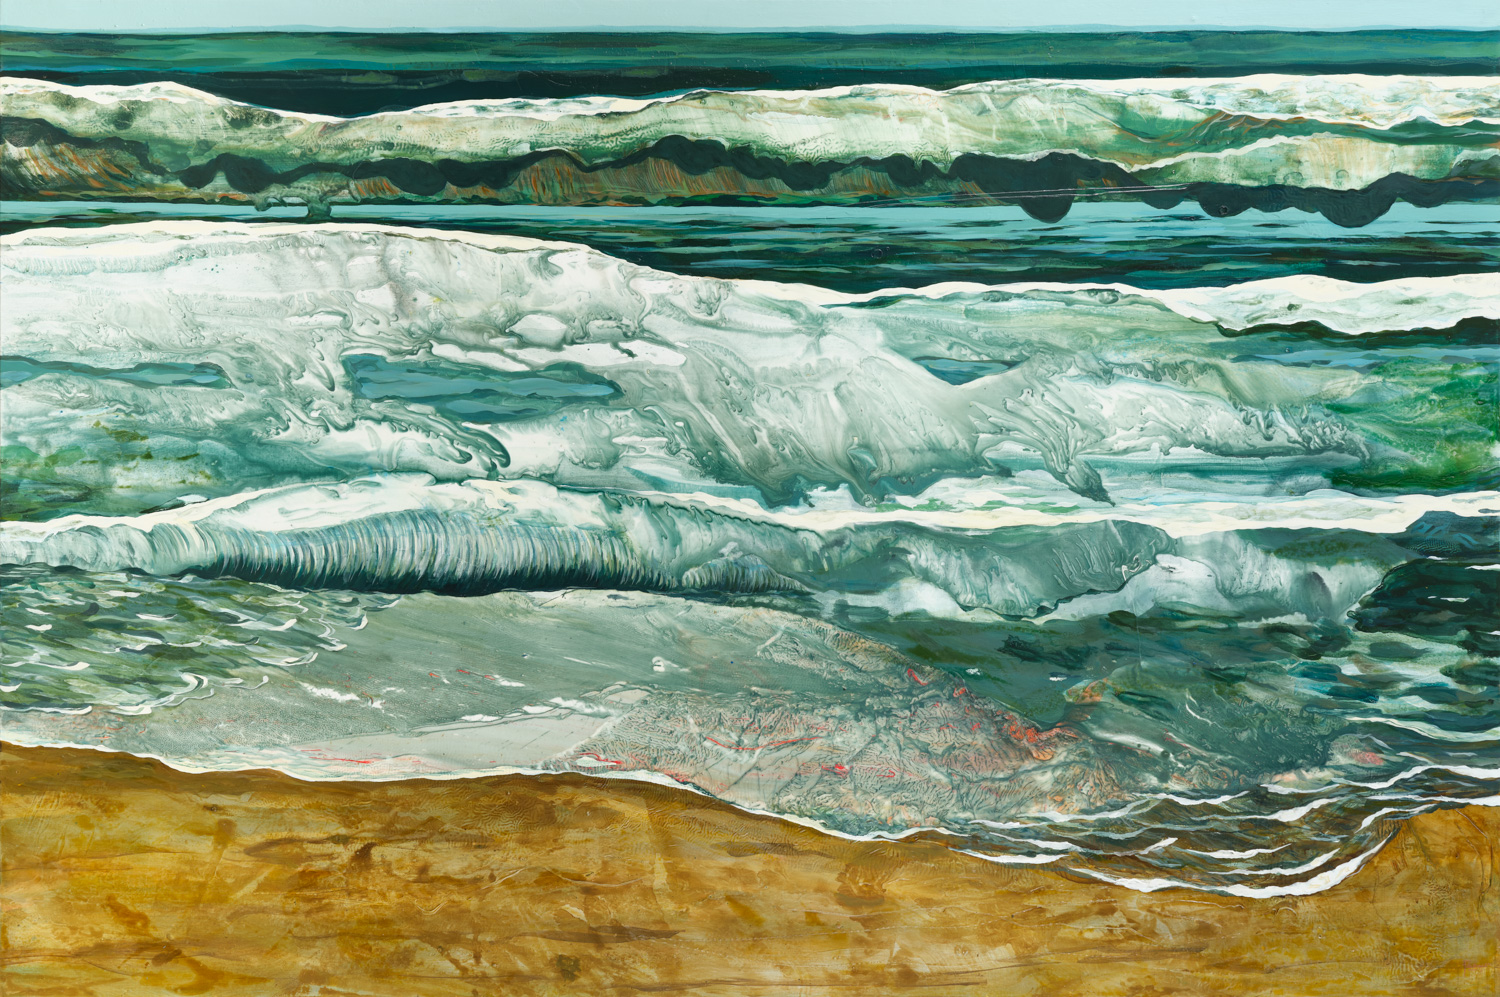 Tracing the sand, mixed media on canevas, diptych, 390 x 130 cm, canevas 2, 195 x 130 cm,  photography @Cyrille Cauvet